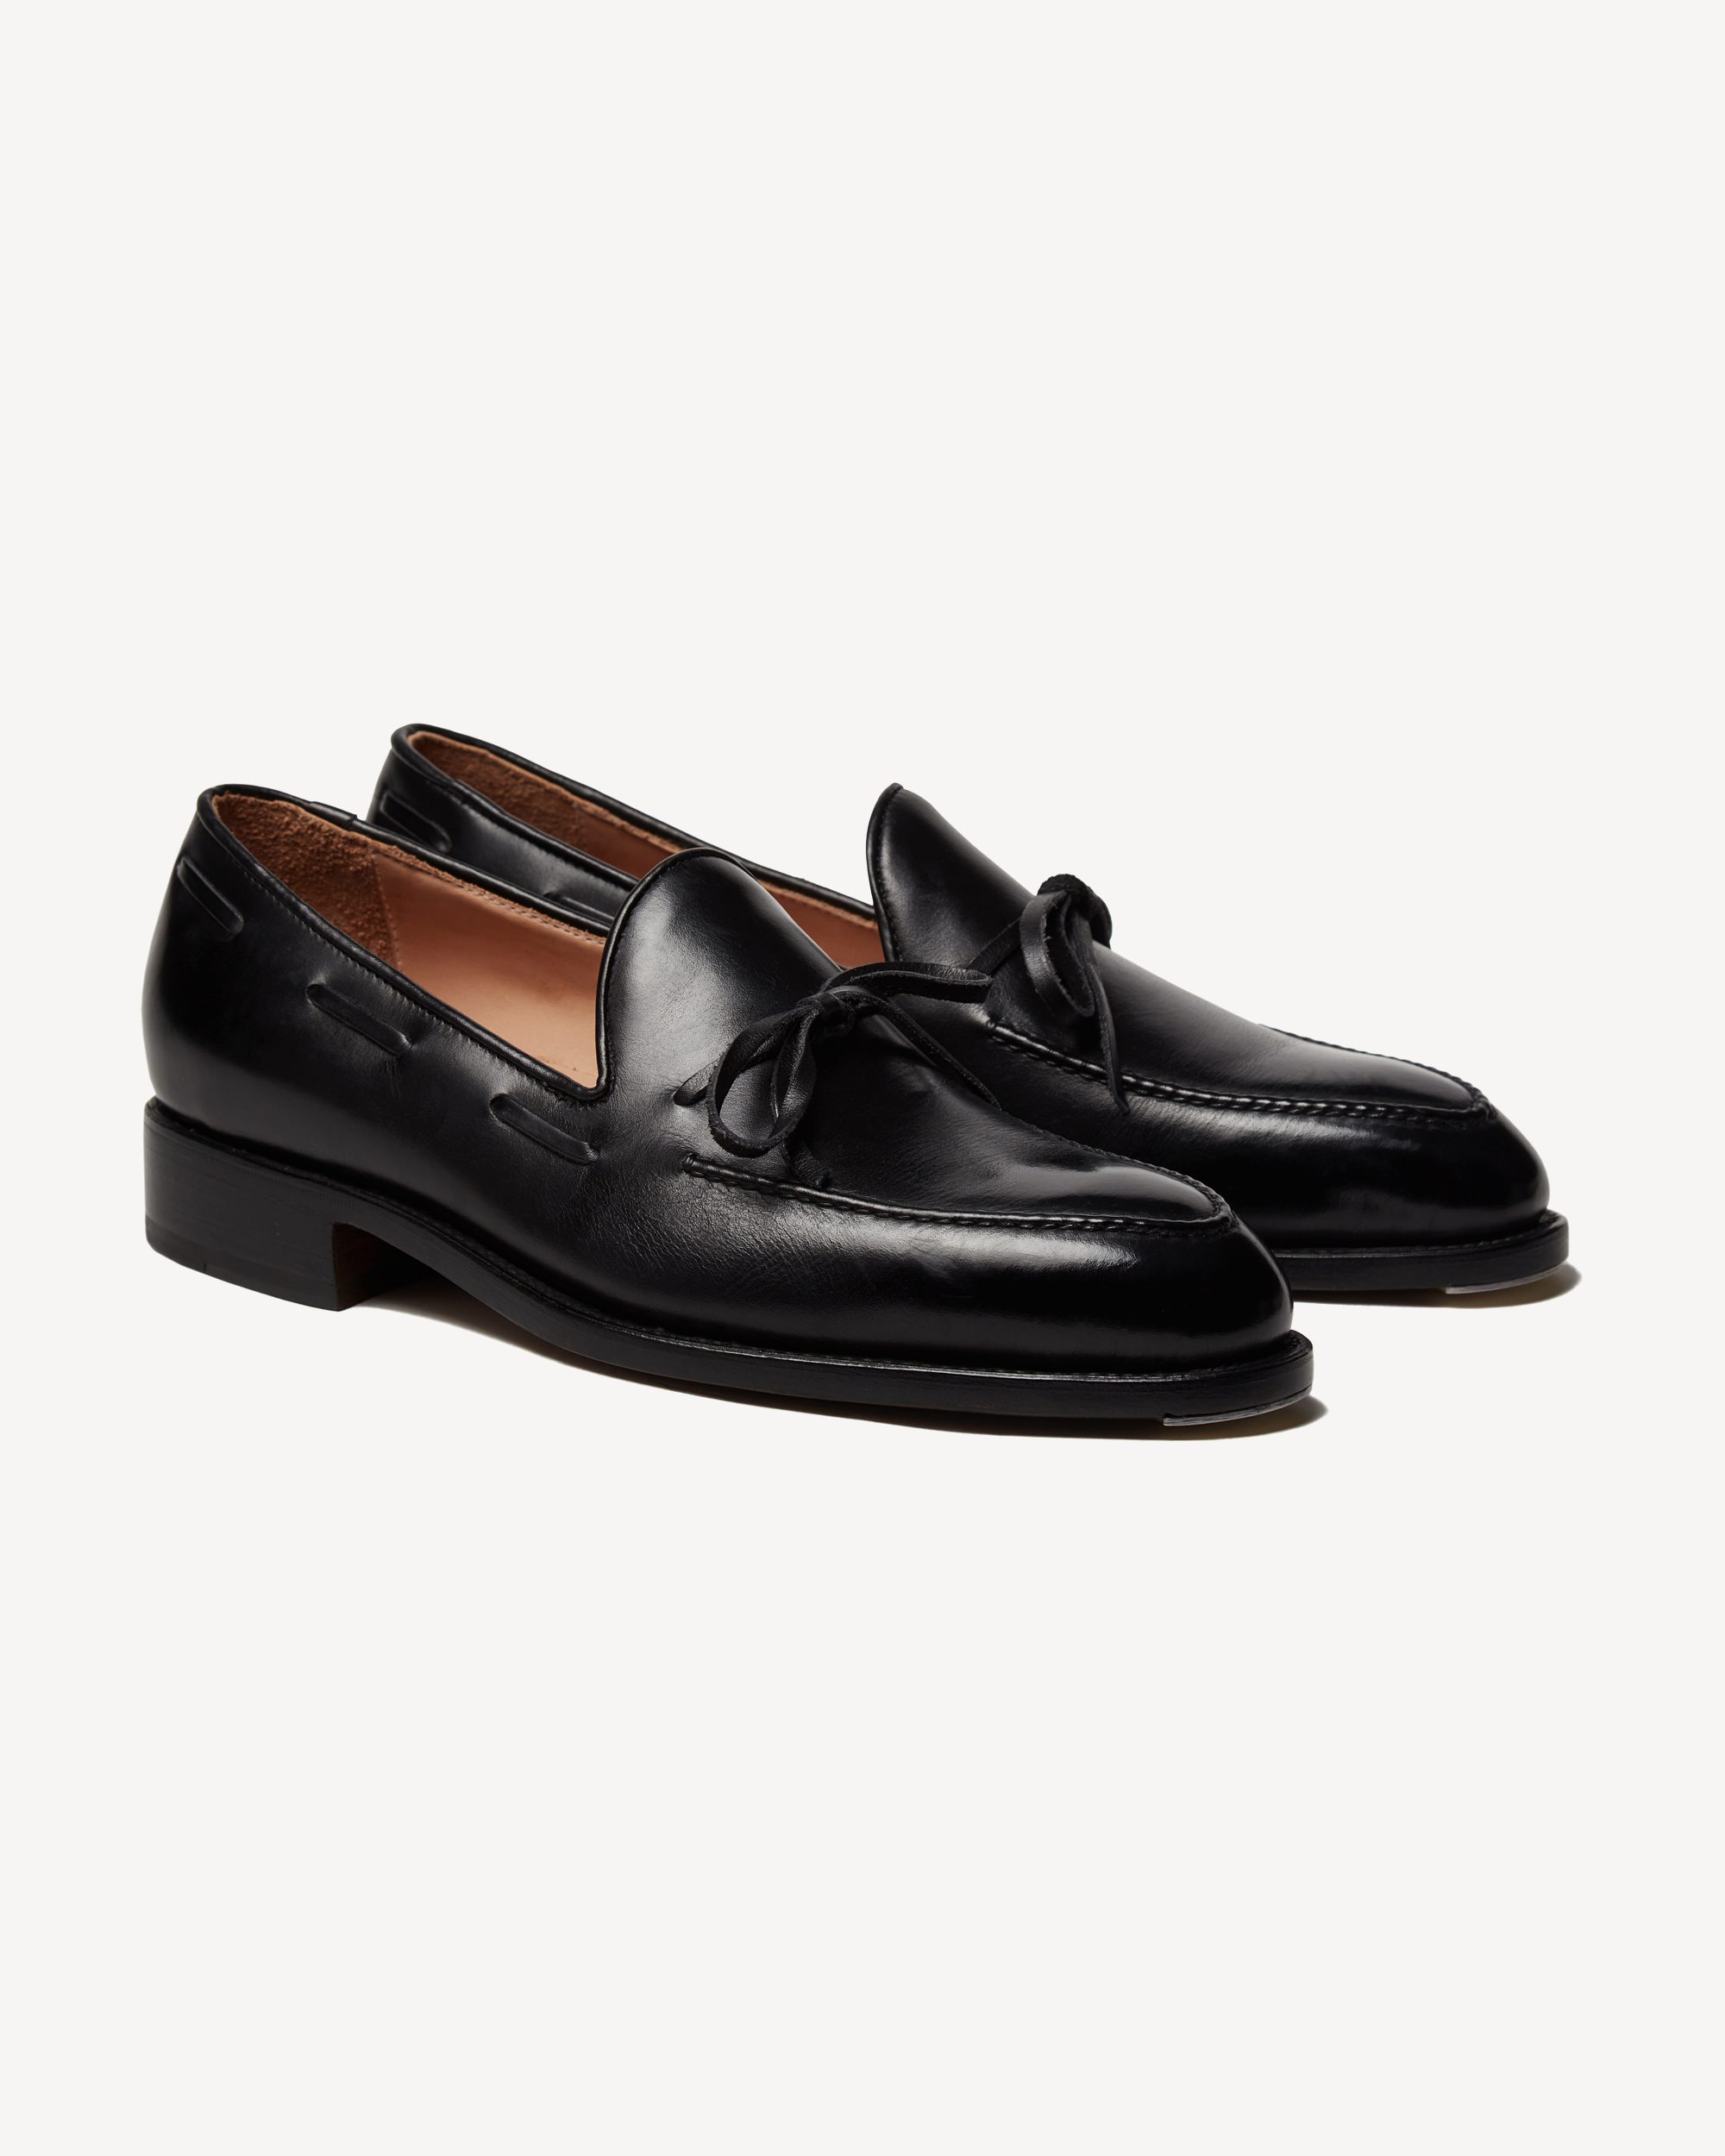 Edhen Milano hook-detail leather loafers - Black